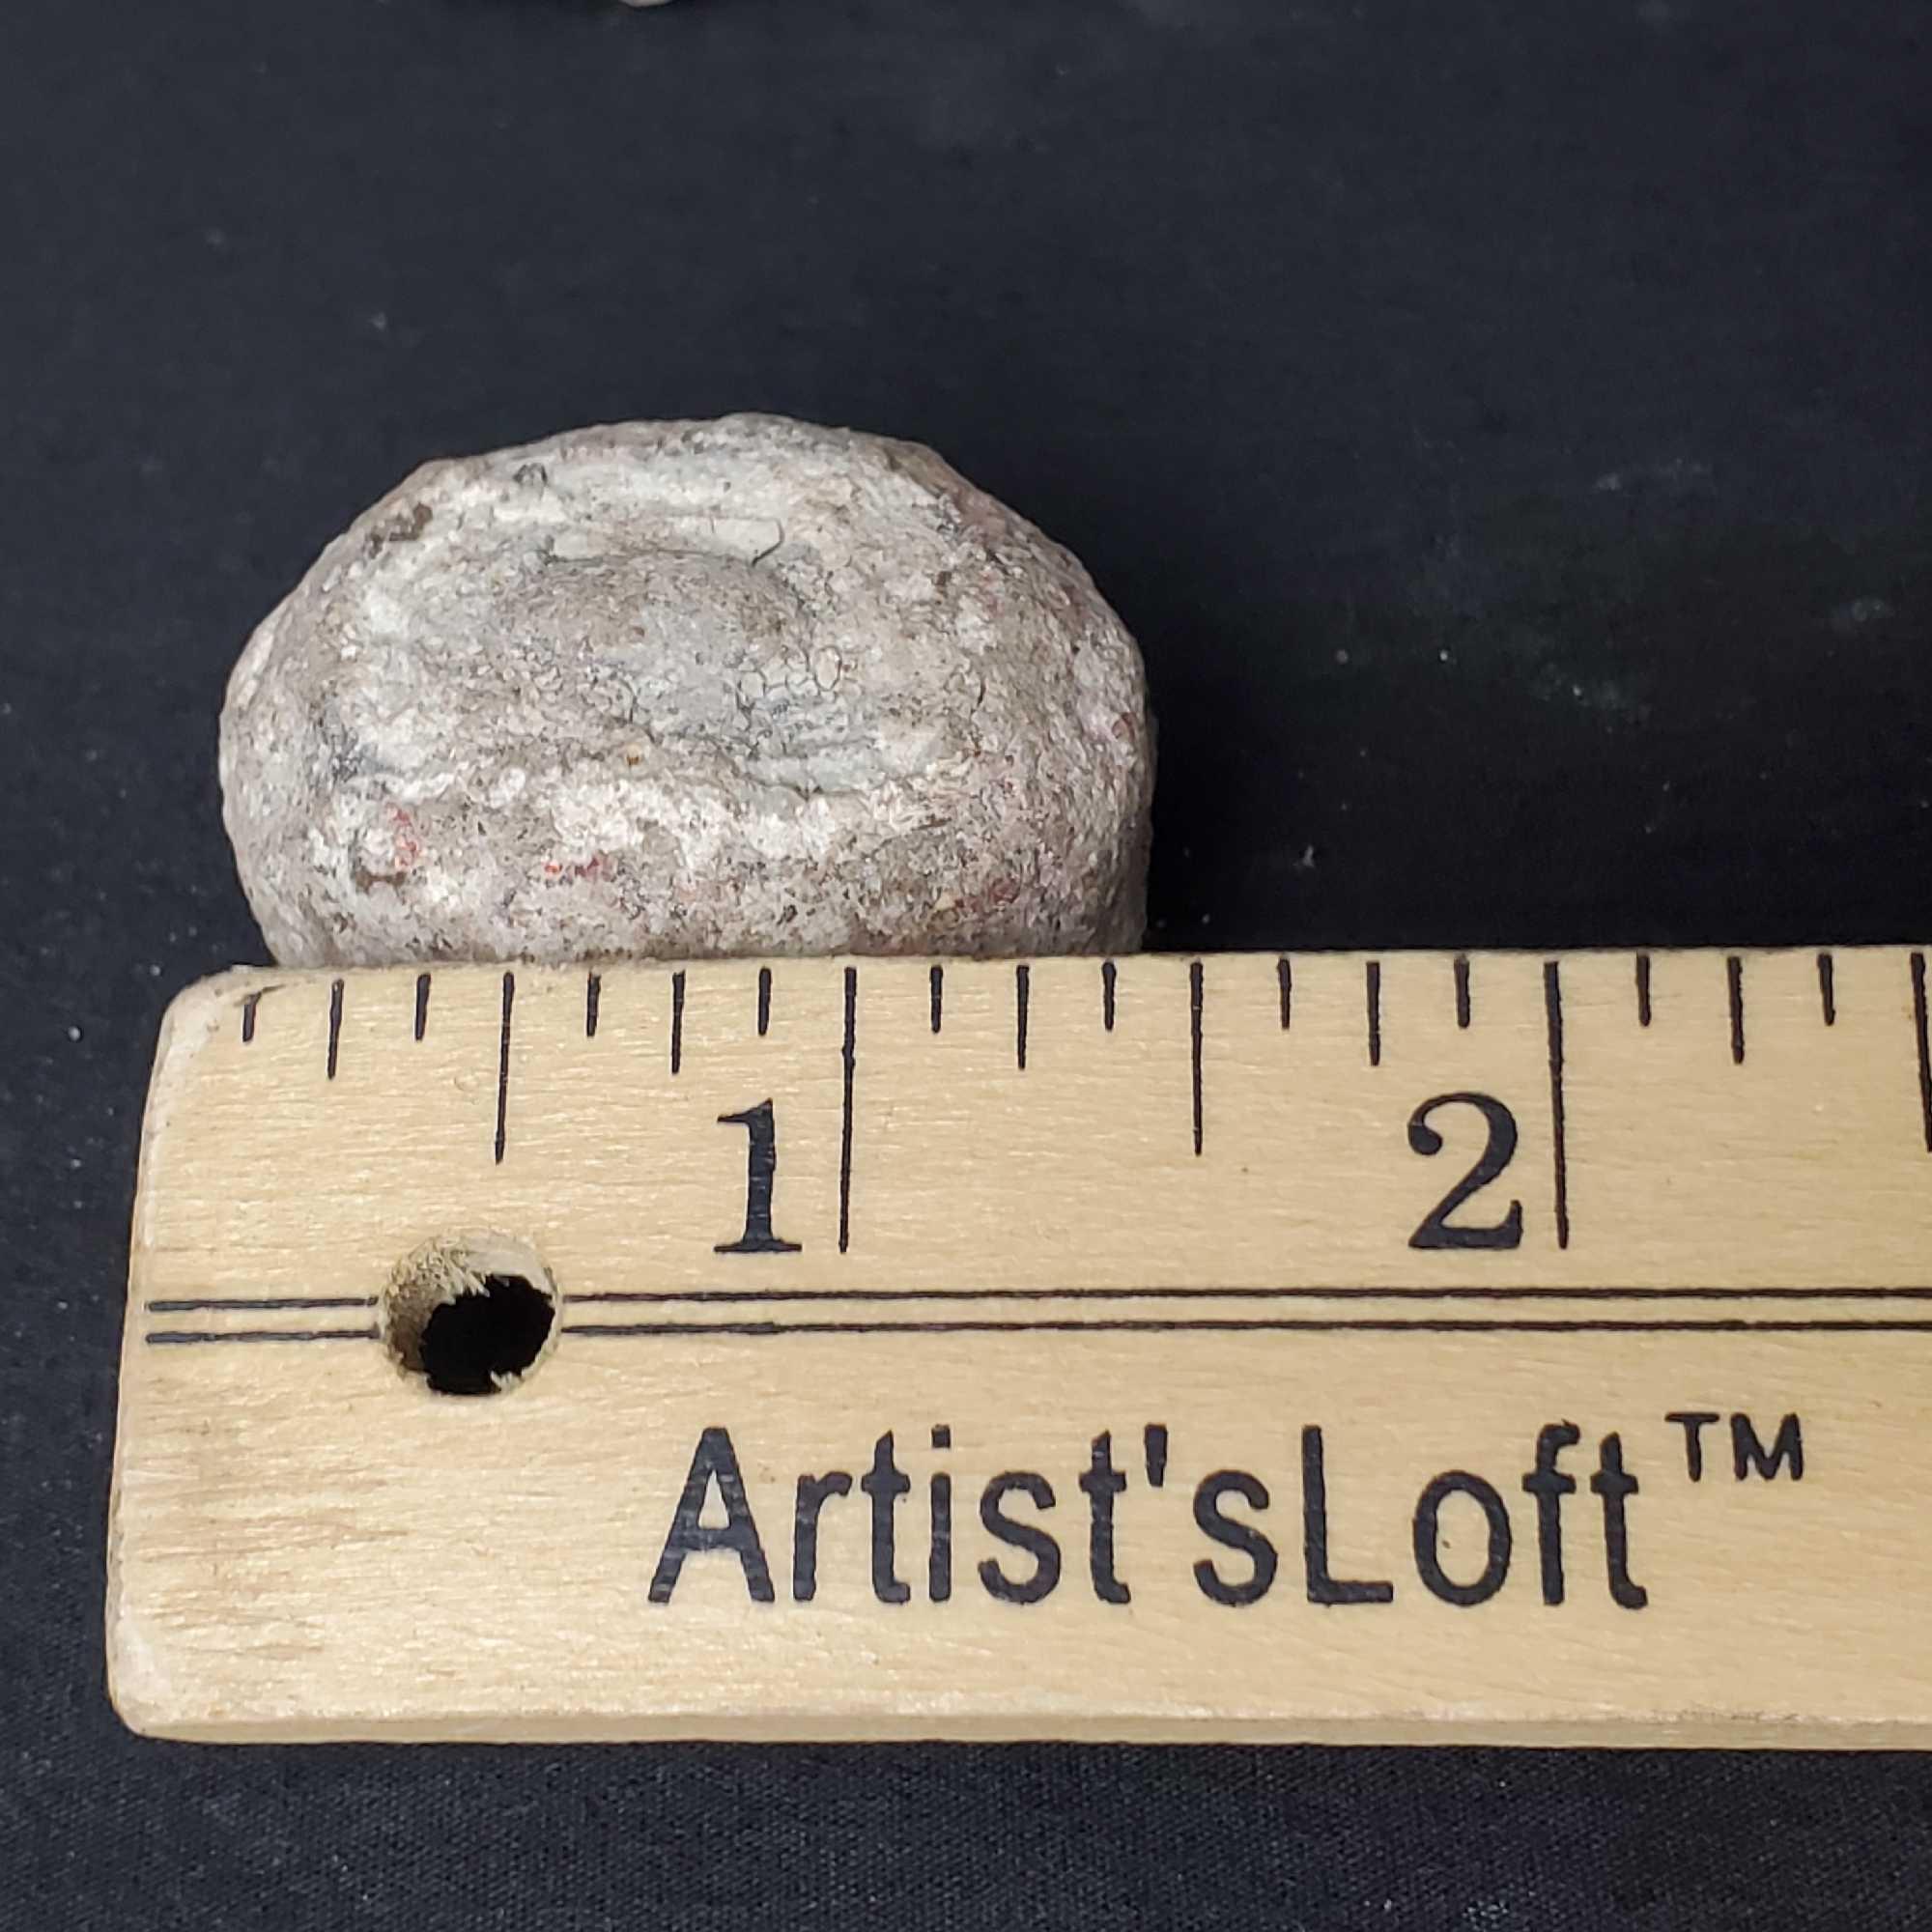 Lot of 6 small Geode specimens whole/not opened